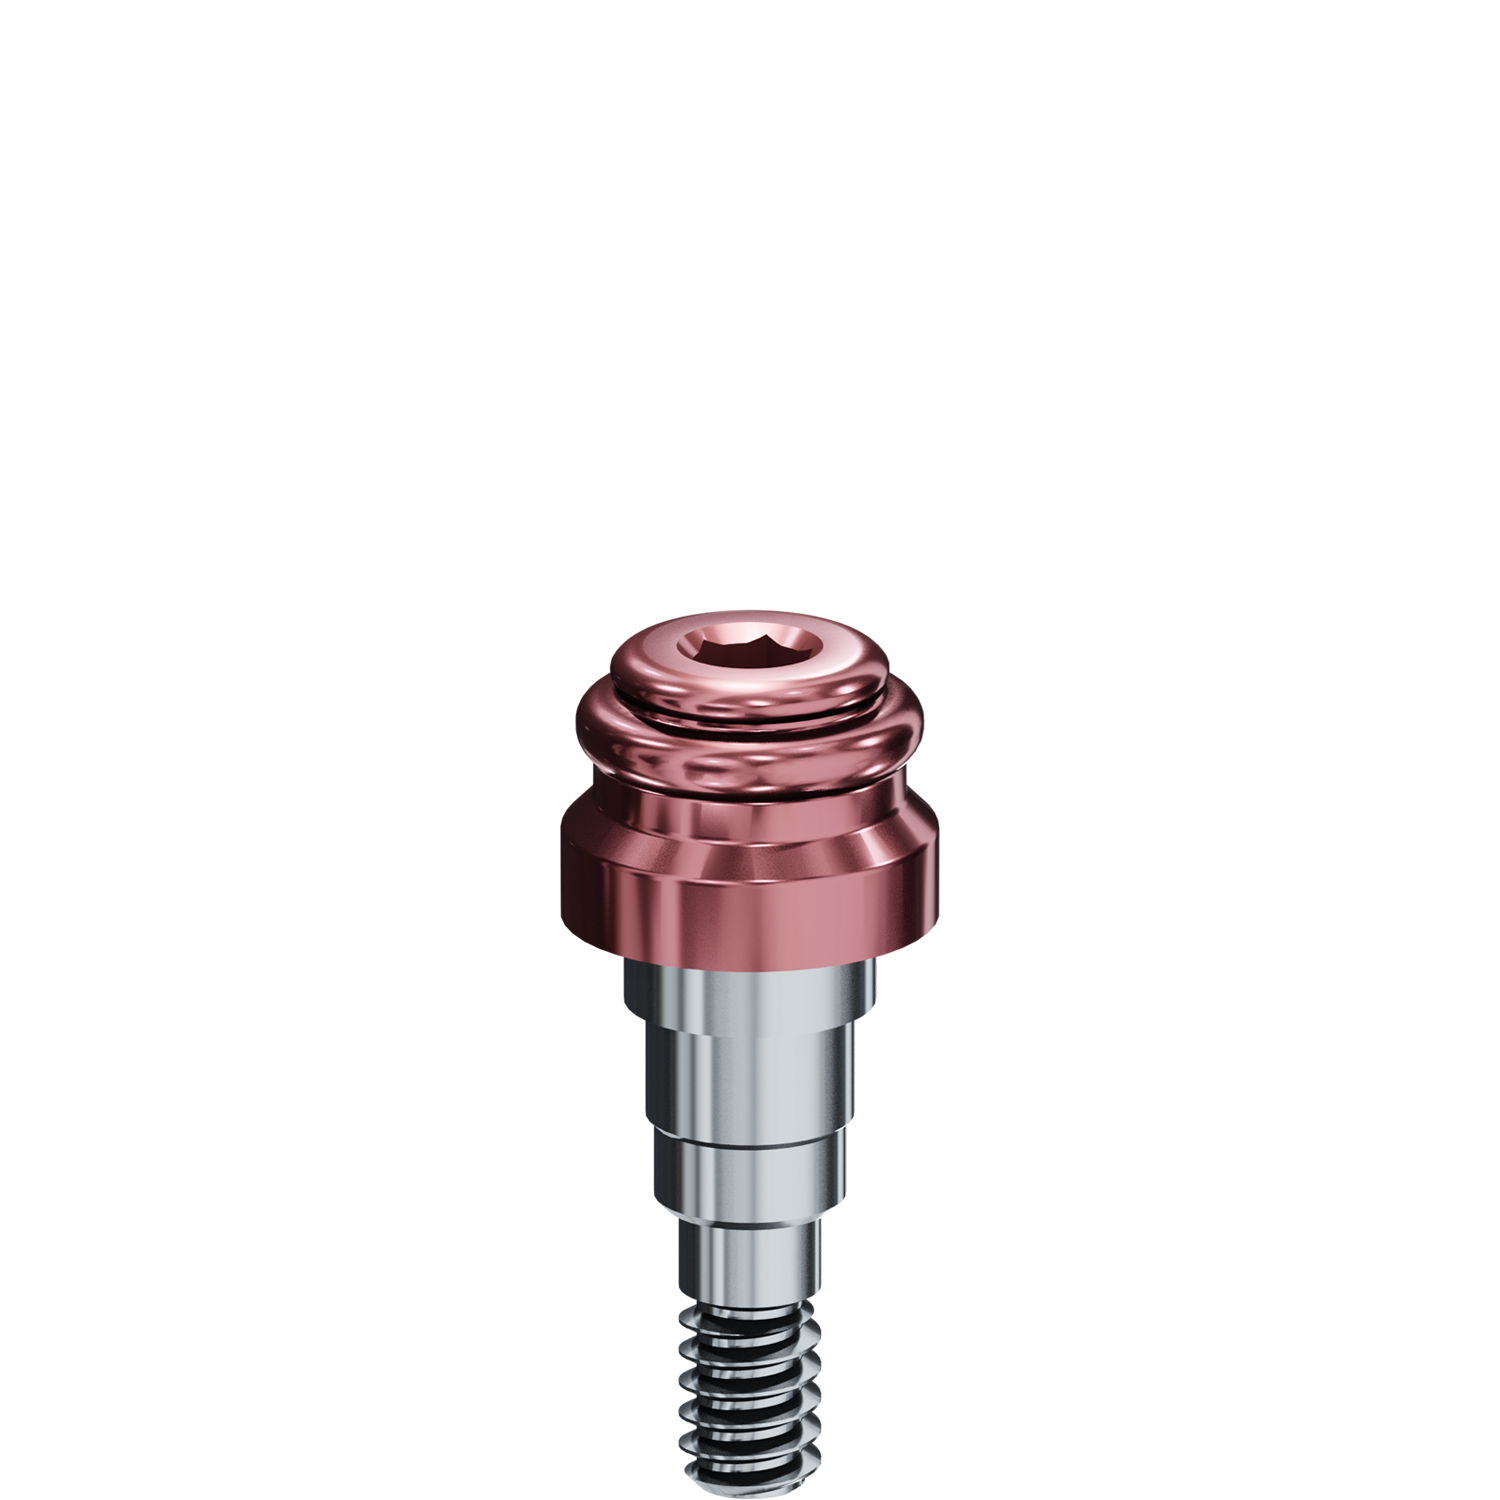 R-Tx Attachment System - Biomet 3i® - 4.1mm Certain Connection - 0.048" Drive - 4.0mm